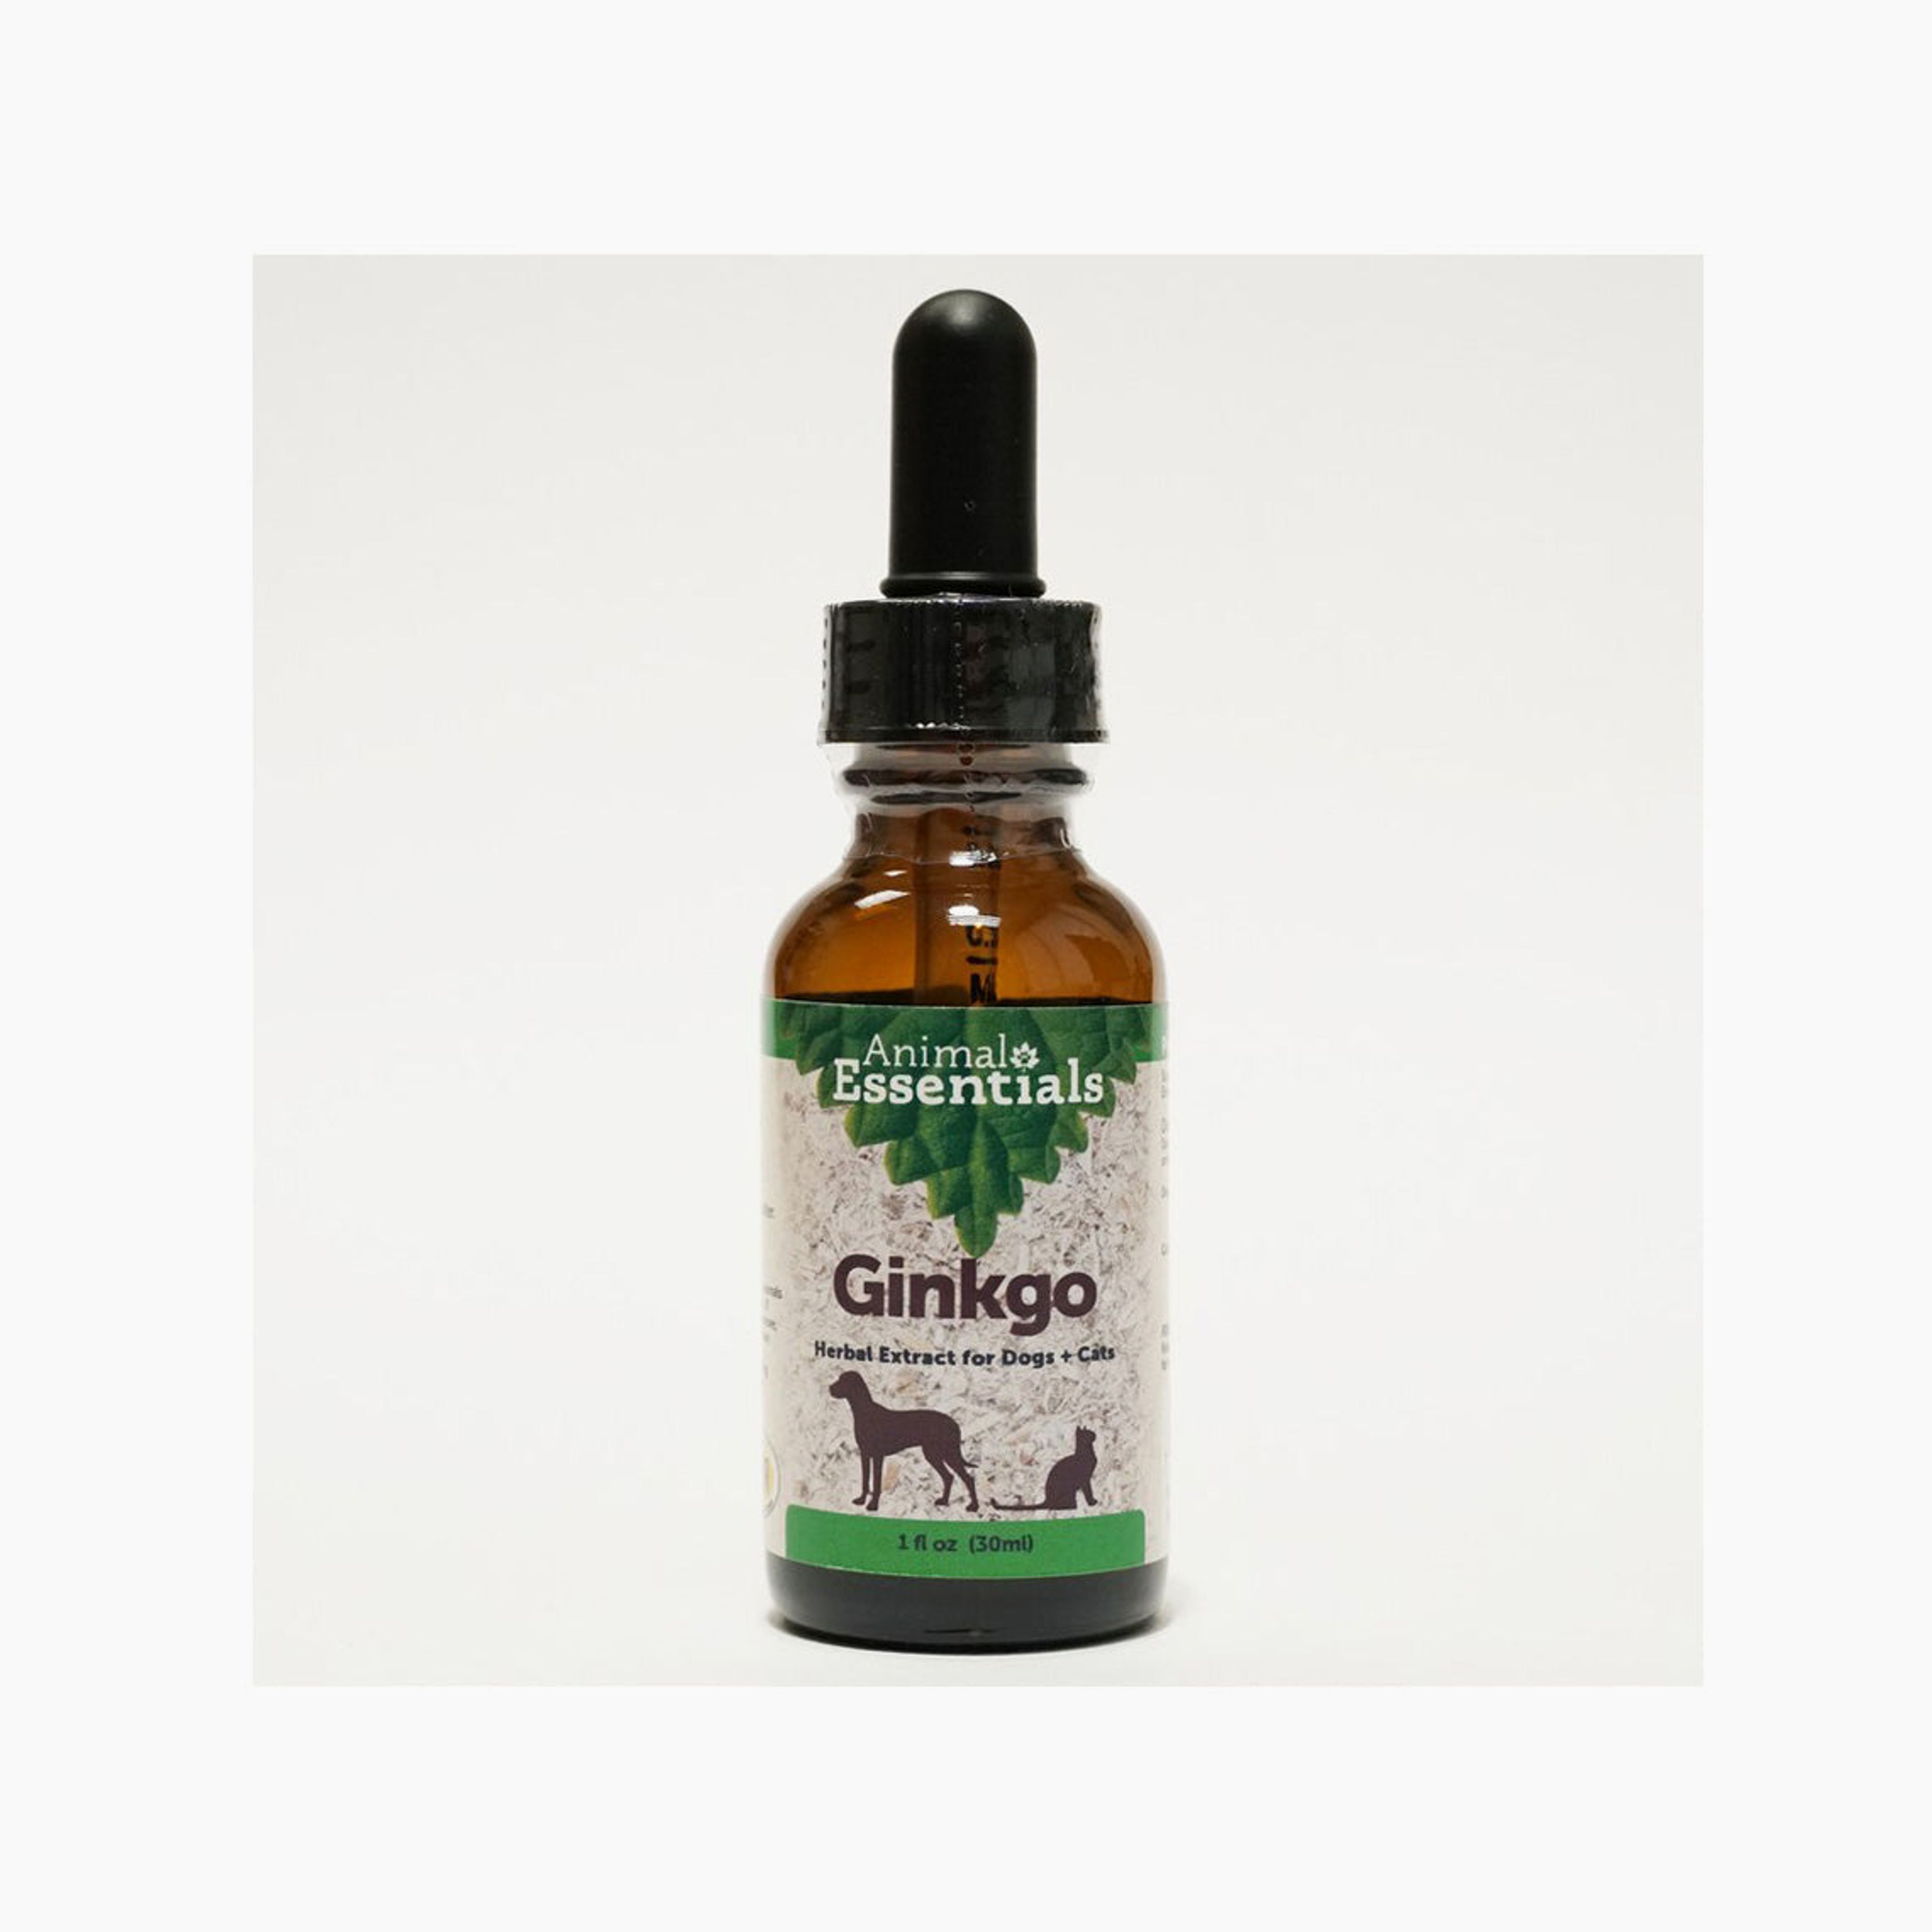 Animal Essentials Ginkgo Liquid Herbal Extract for Dogs & Cats